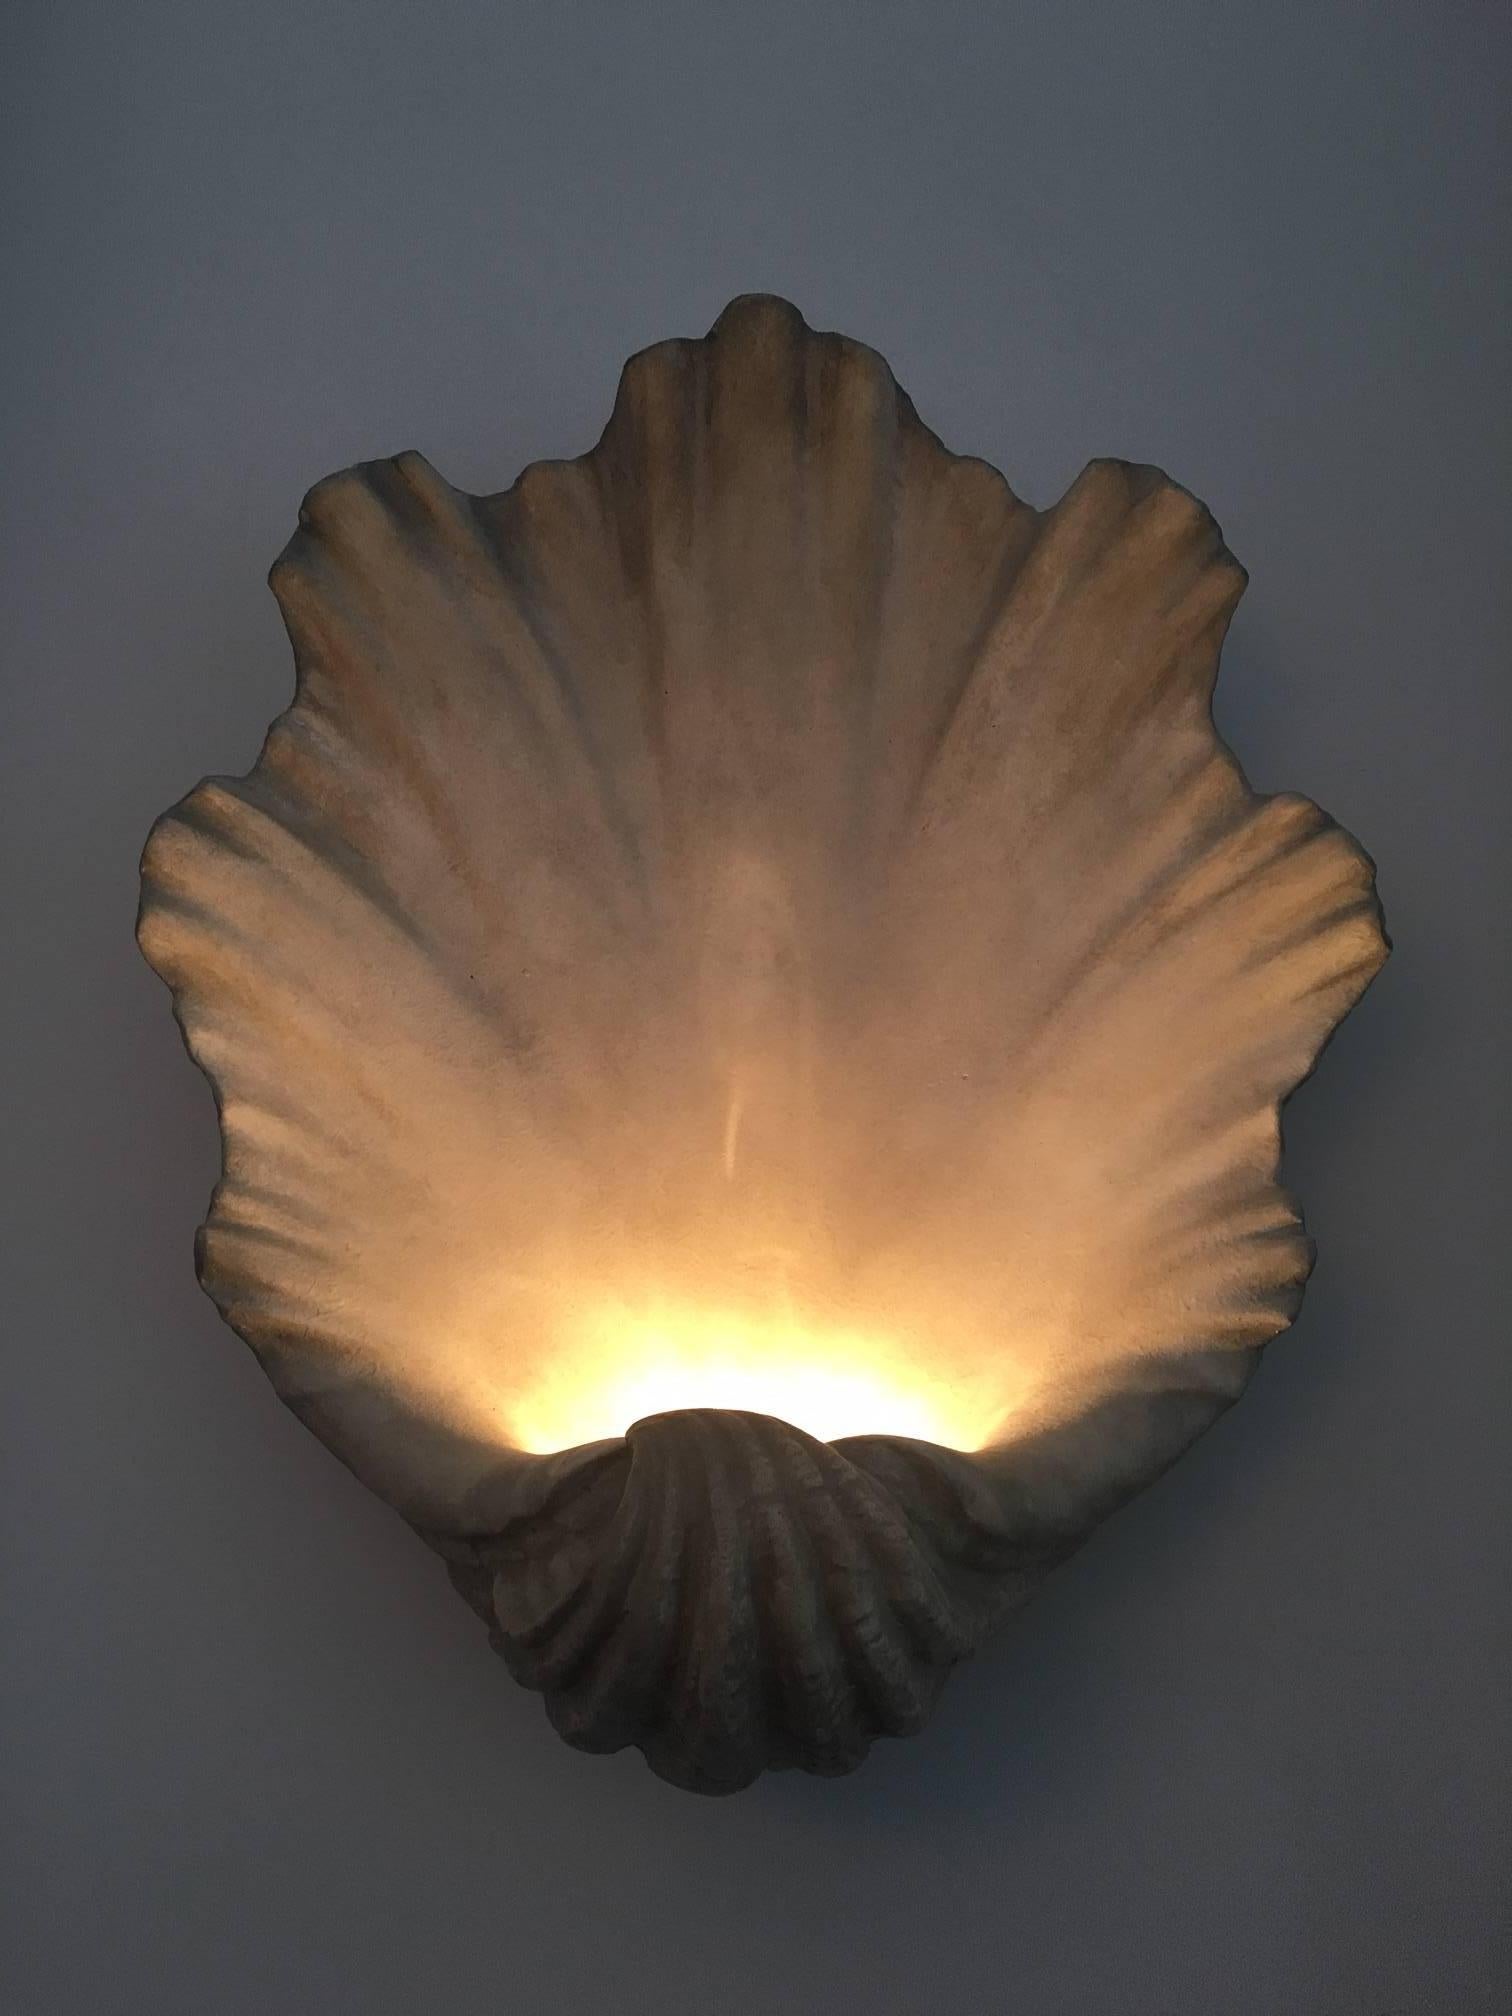 A pair of modern and very decorative scallop shell wall lights, in 1940s style antiqued plaster. Made in London in 2010.